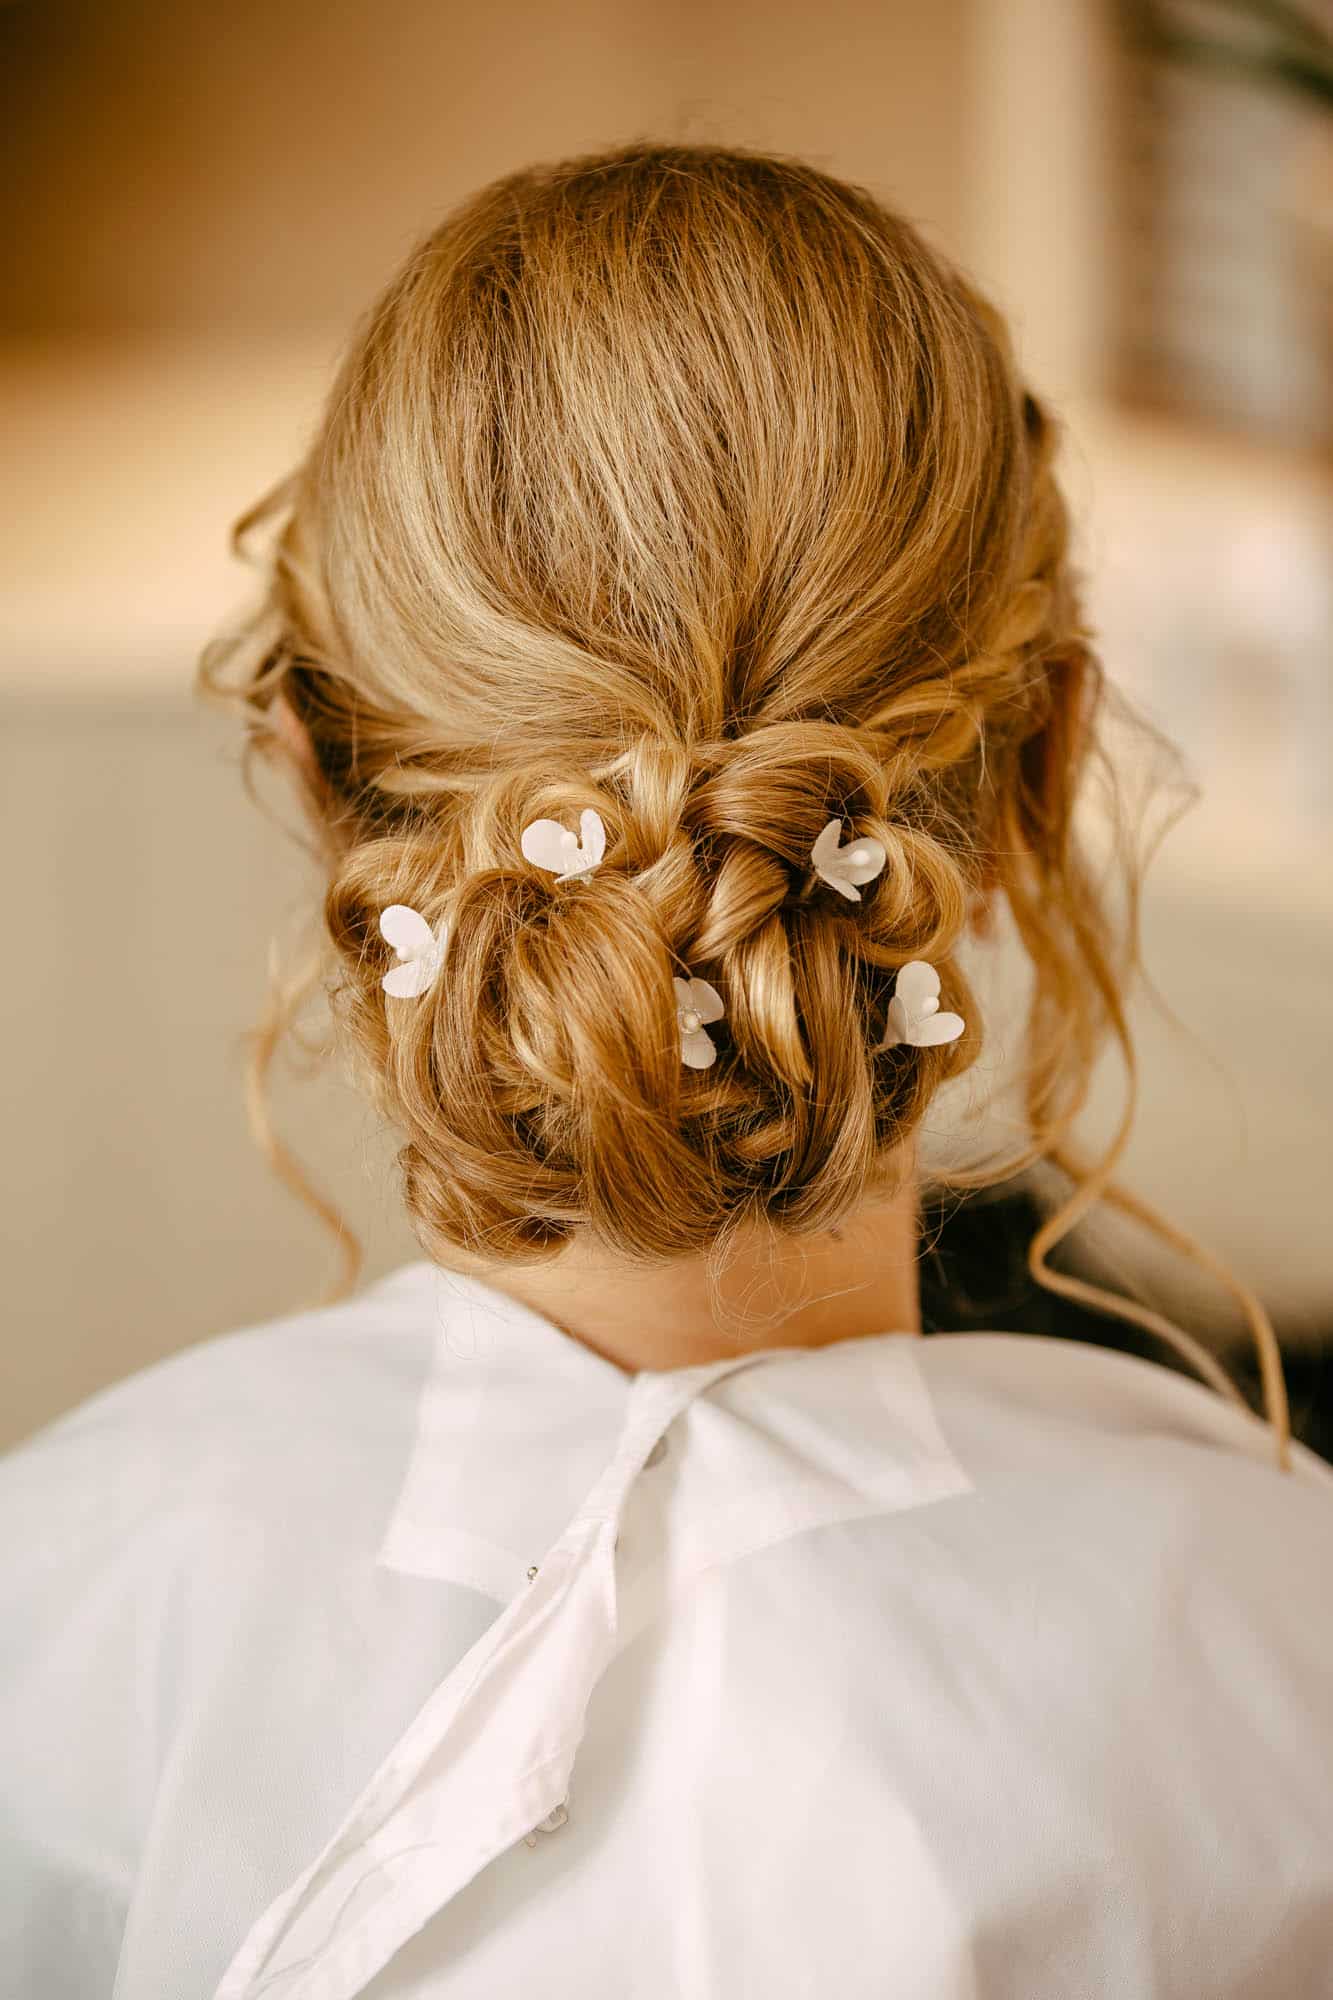 Bridal hairstyles with flowers that gracefully accentuate a woman's hair.